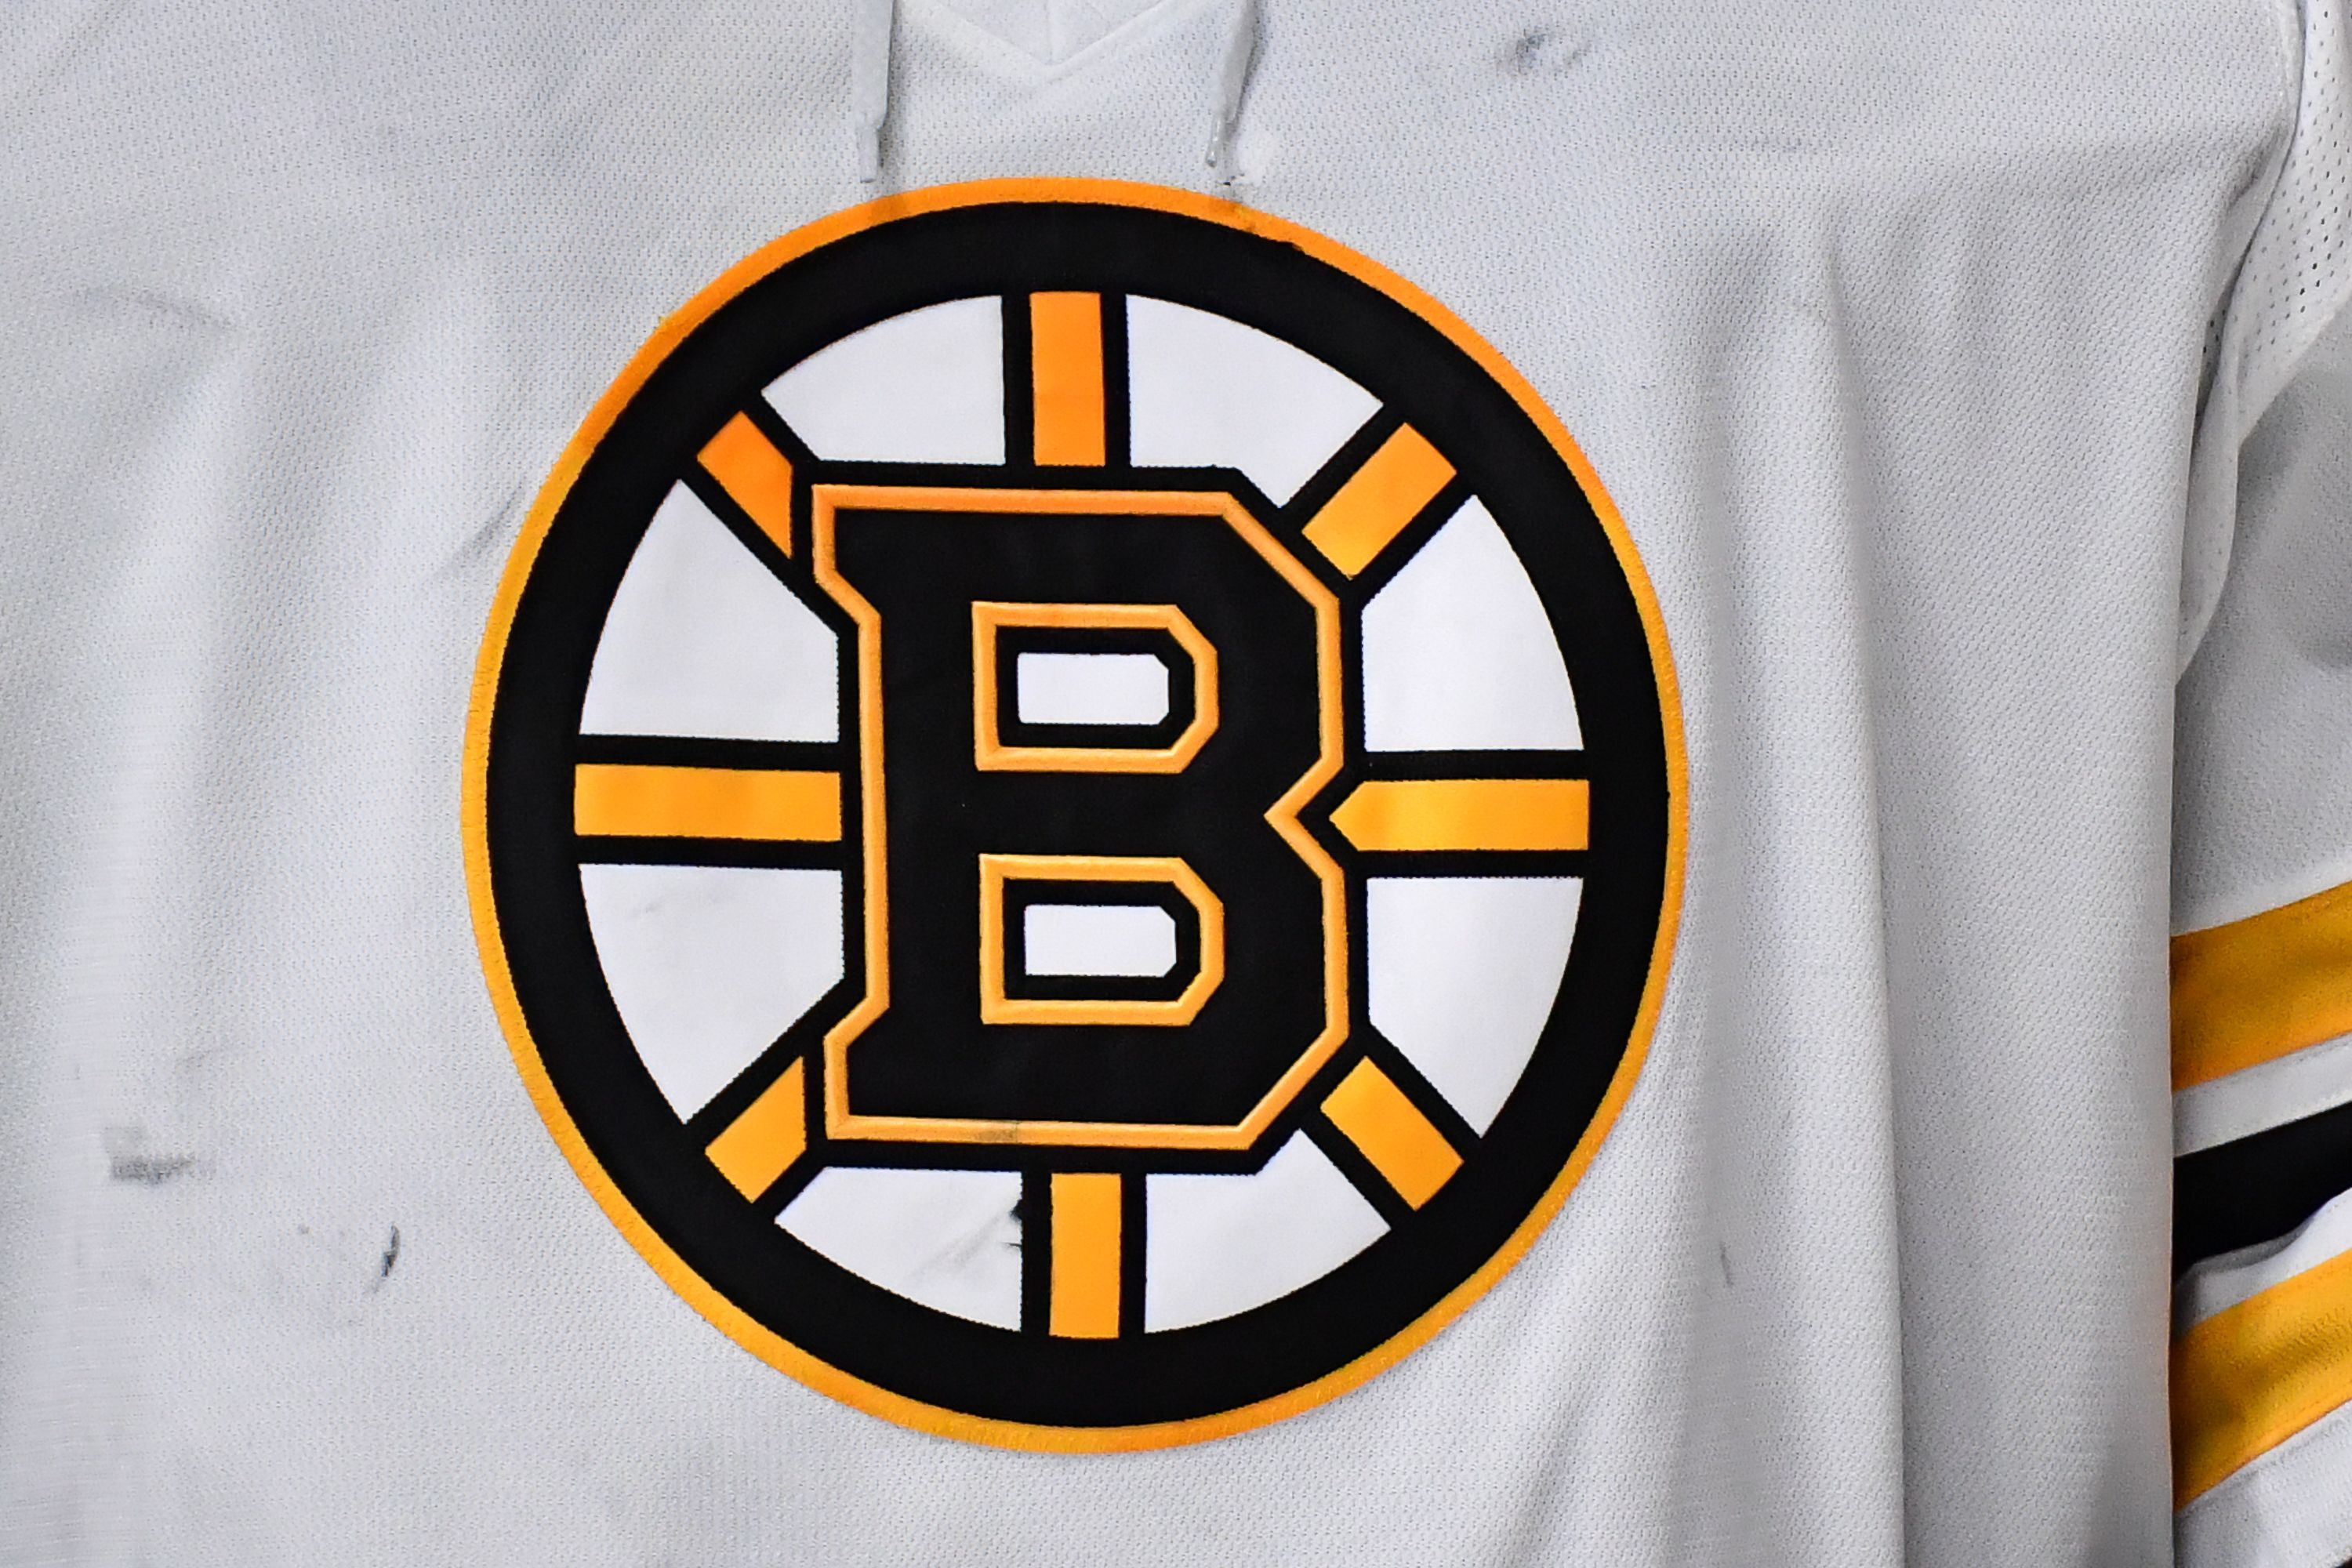 Boston Bruins sign prospect previously involved in bullying scandal